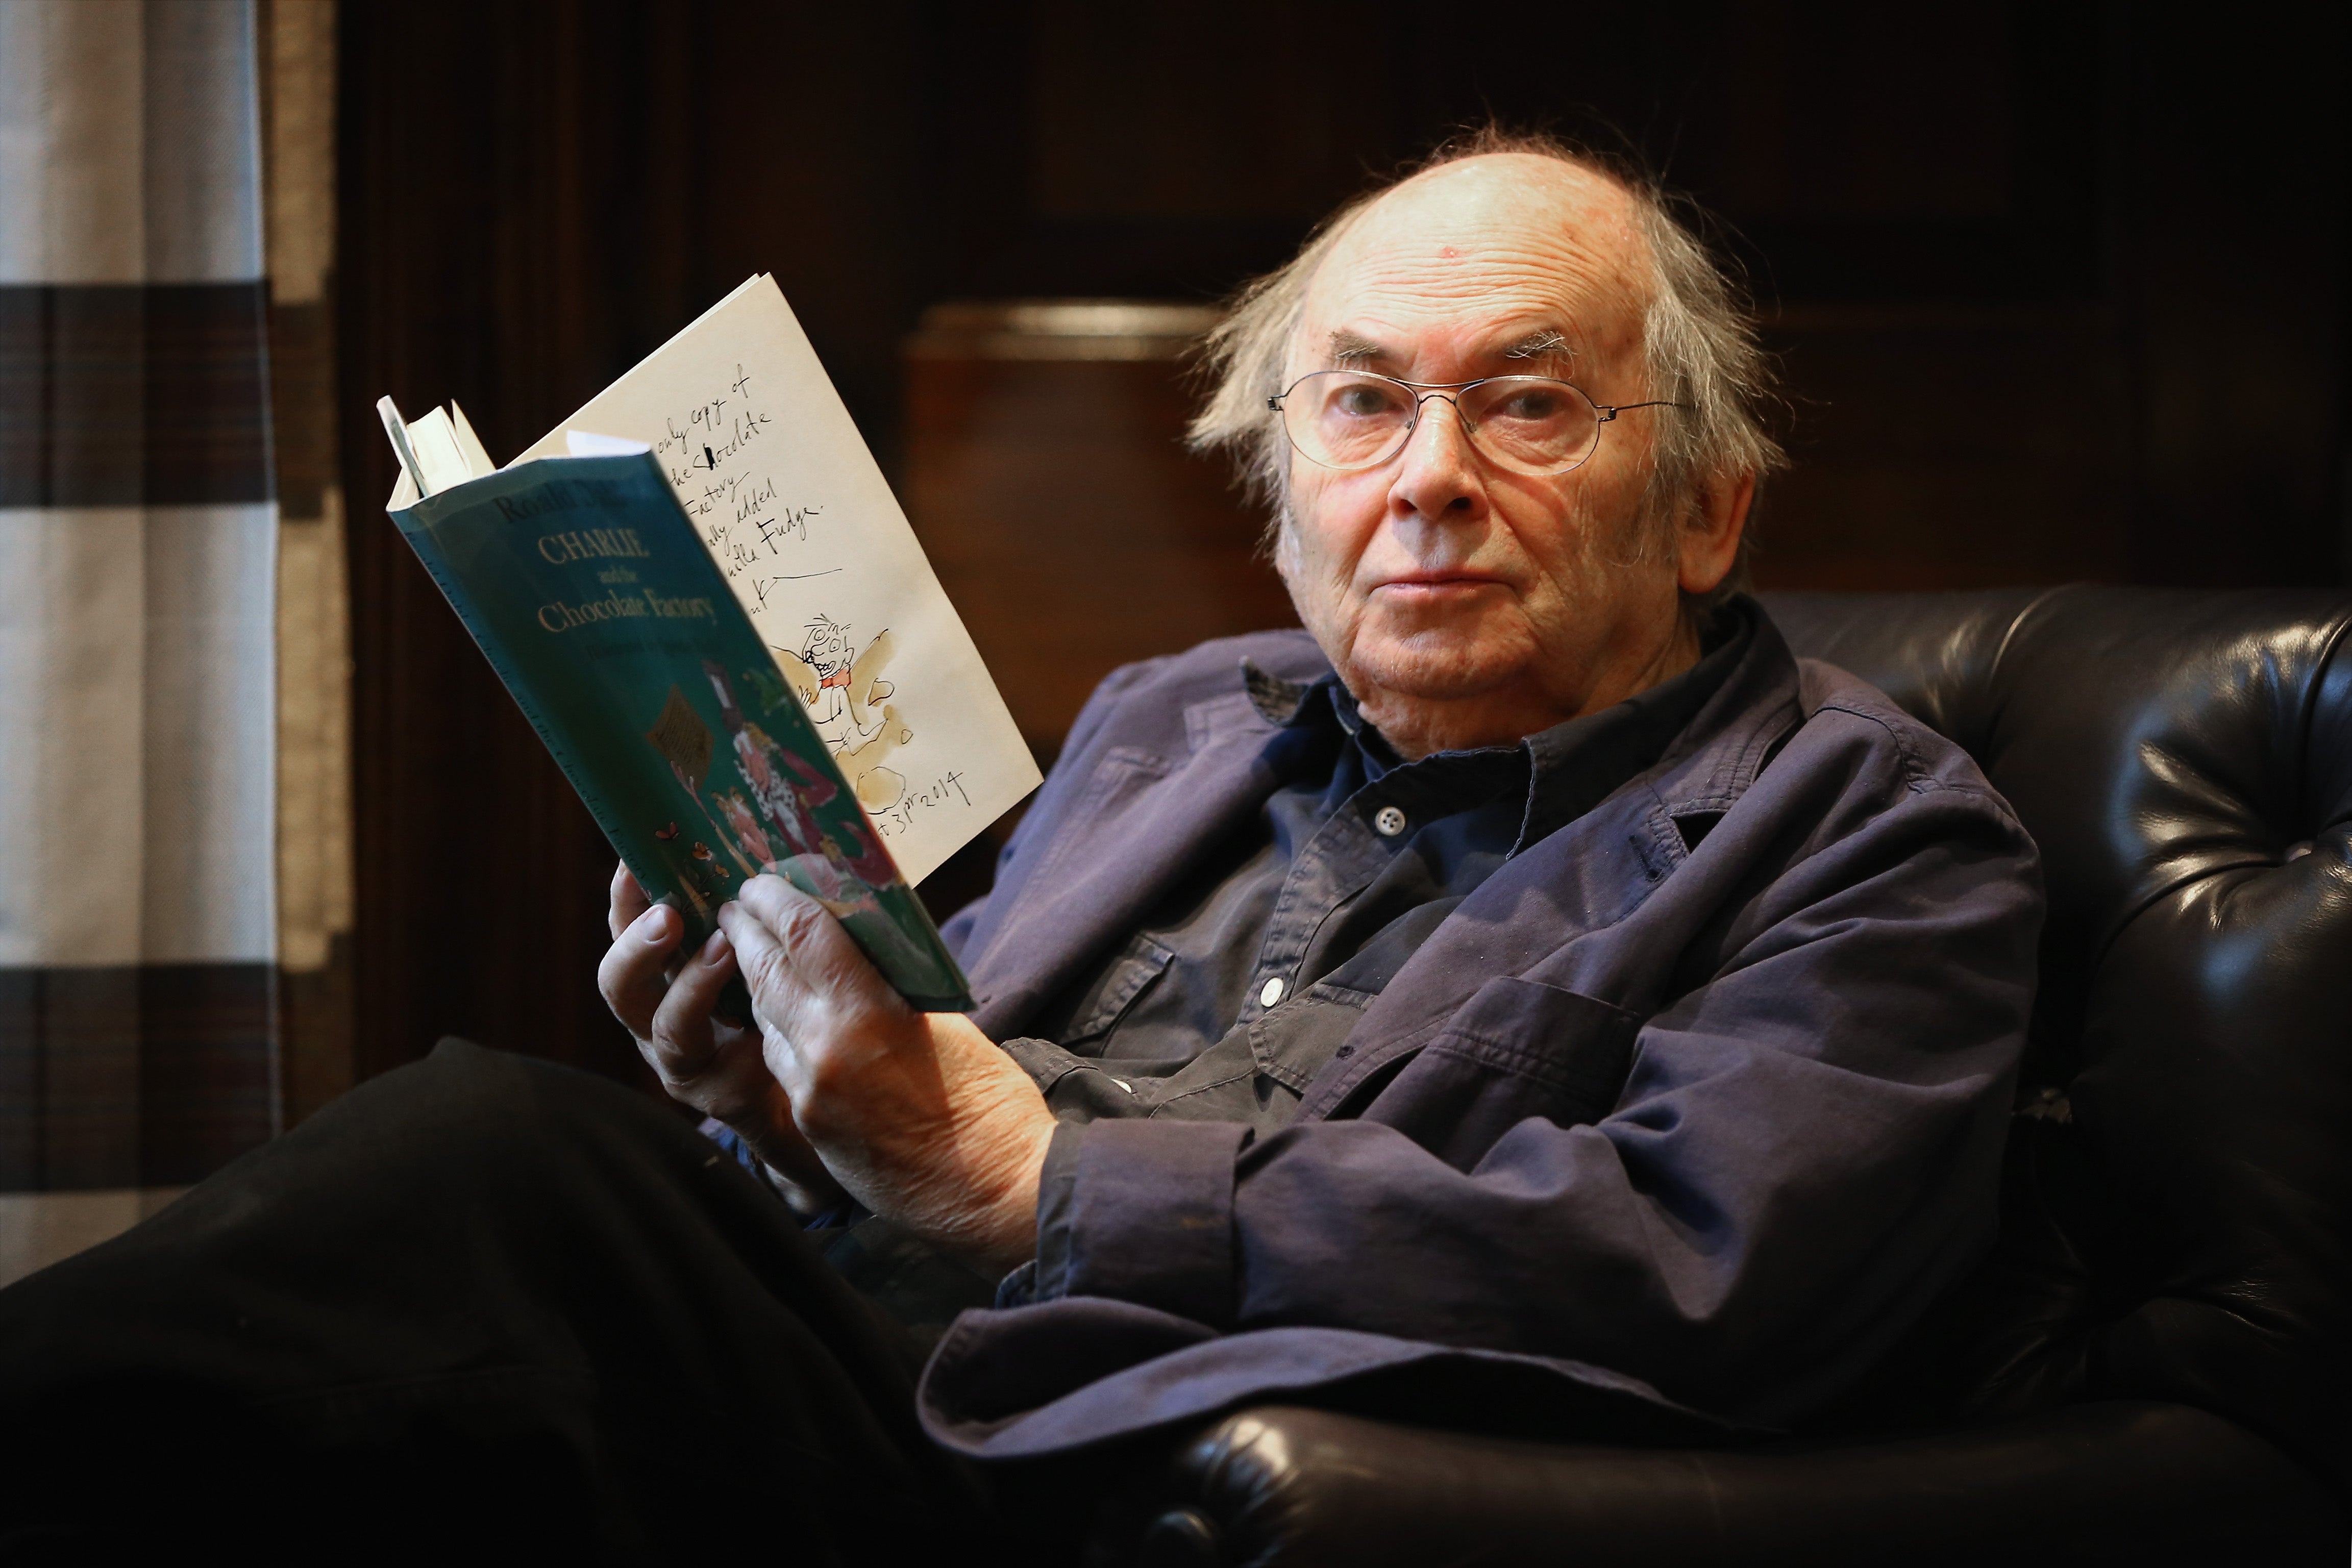 Quentin Blake said Roald Dahl would have been against rewriting of his work